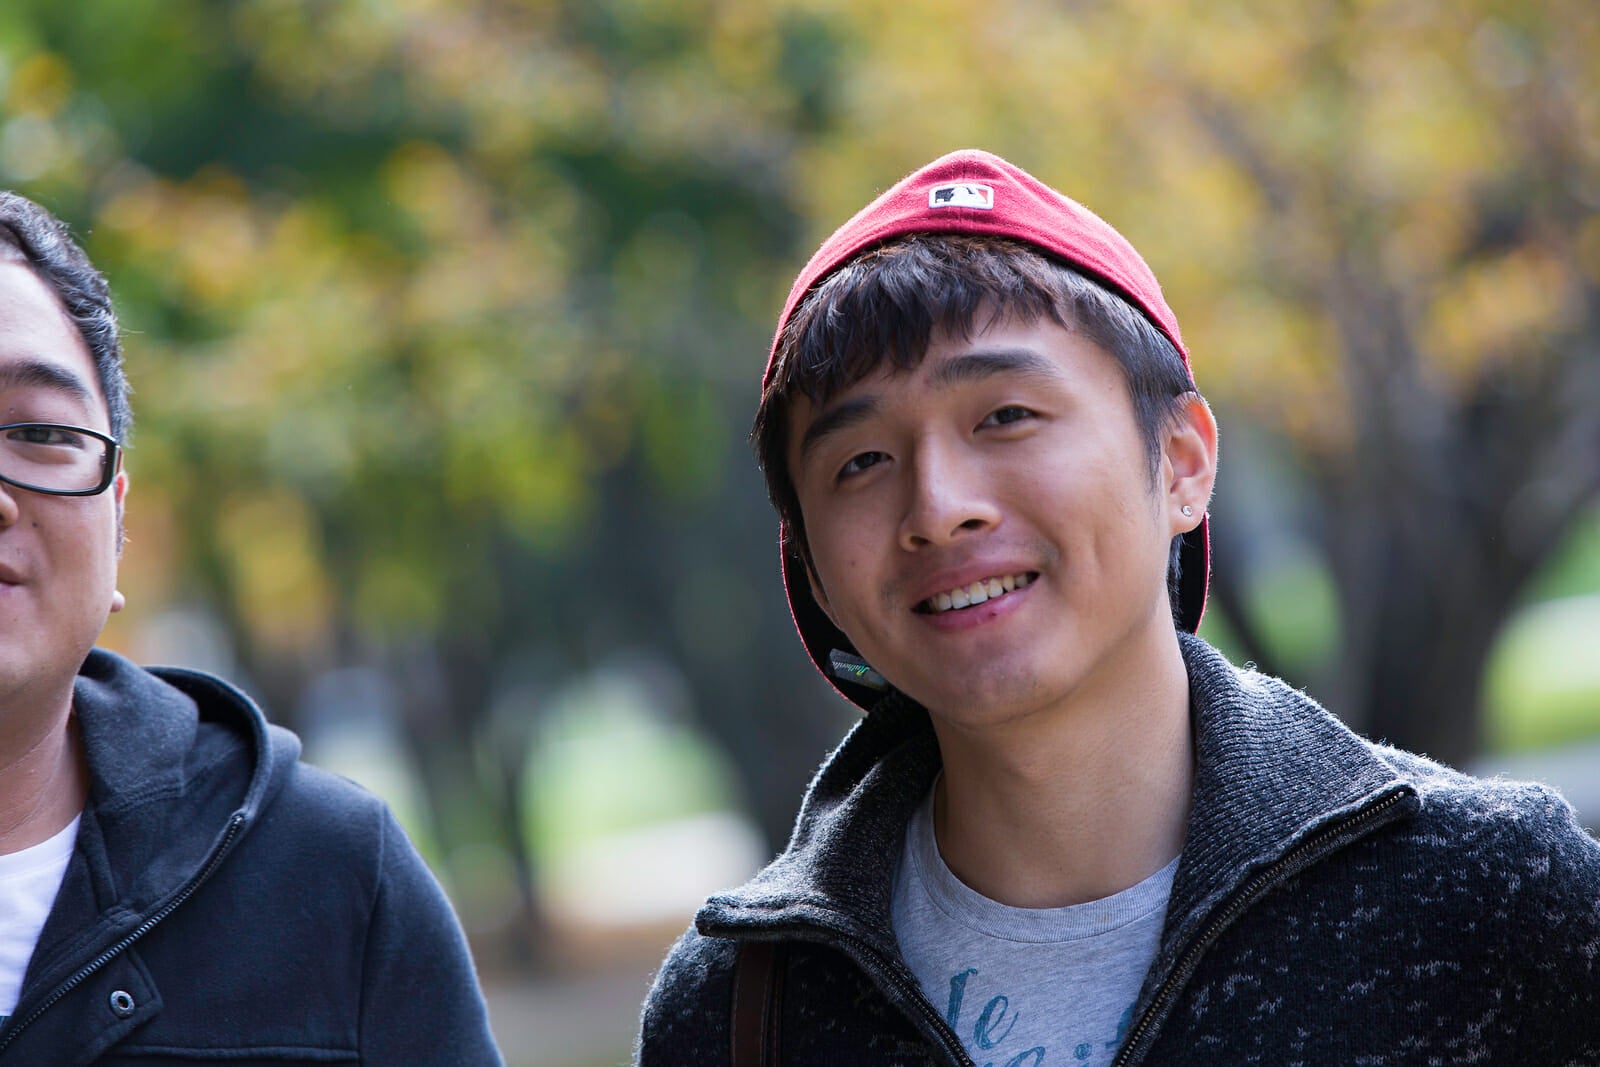 Student with backwards red baseball cap smiling